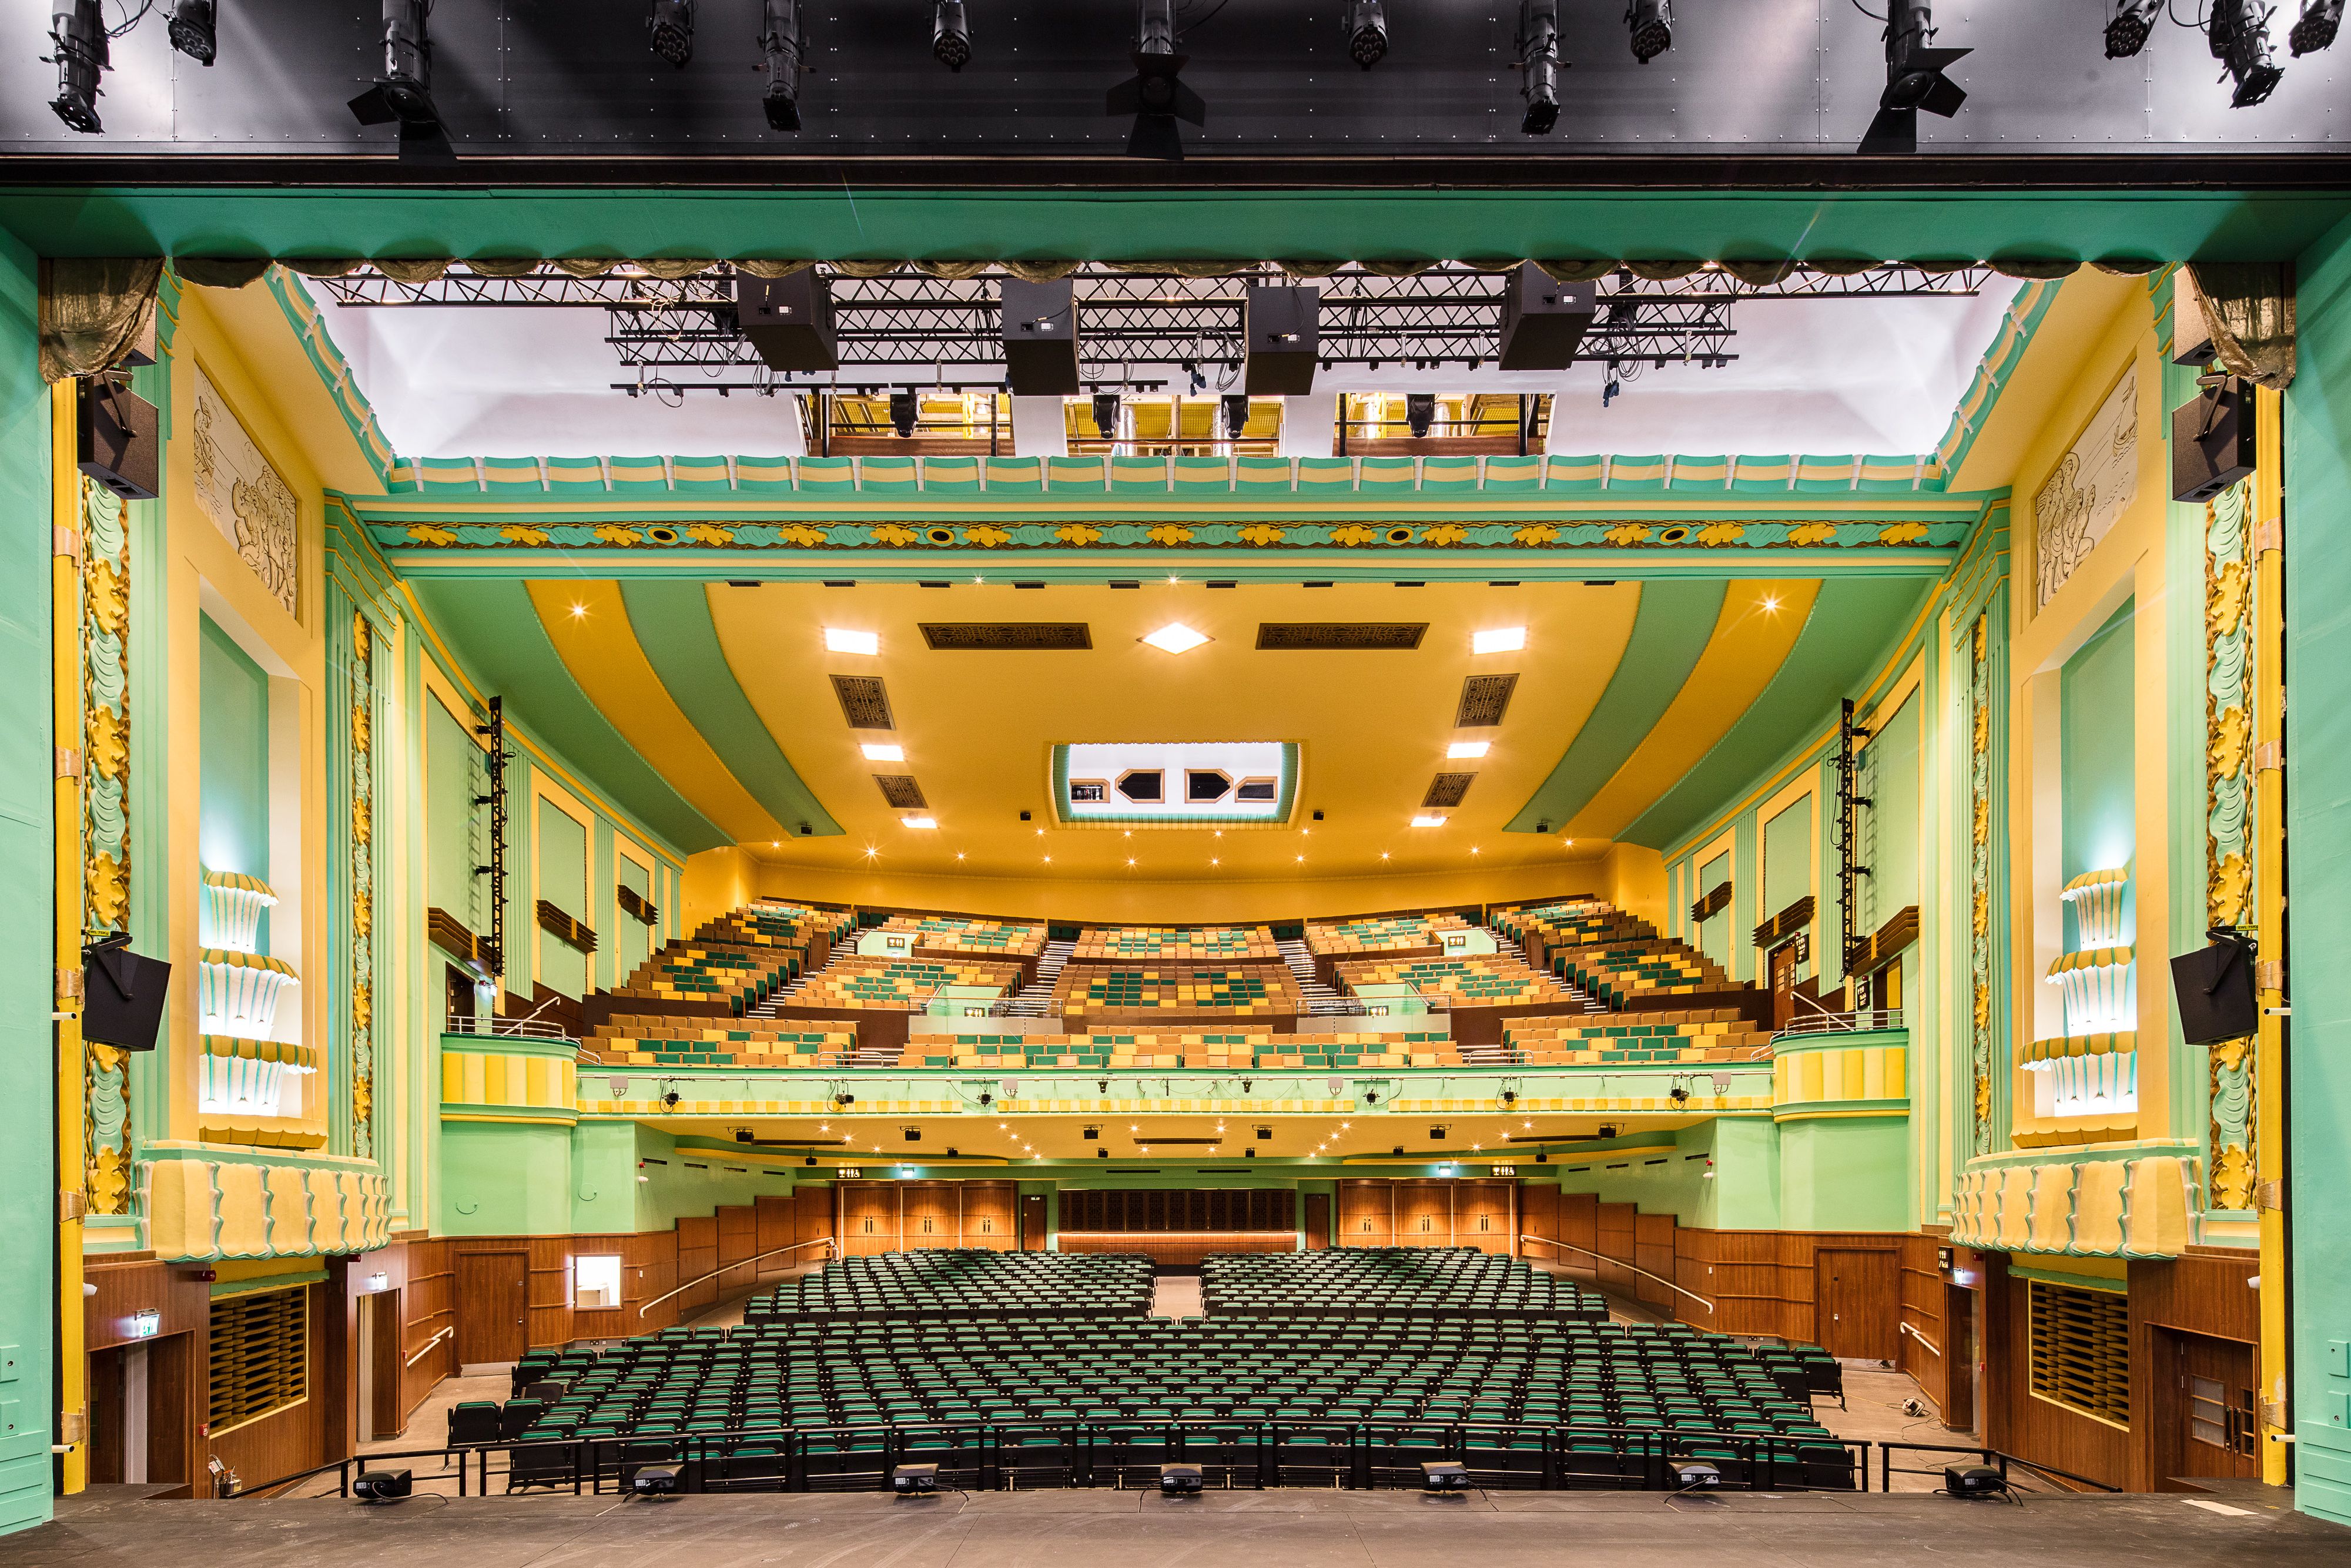 Stage view of Stockton Globe's 3,000 capacity auditorium featuring state-of-the-art lighting and sound system